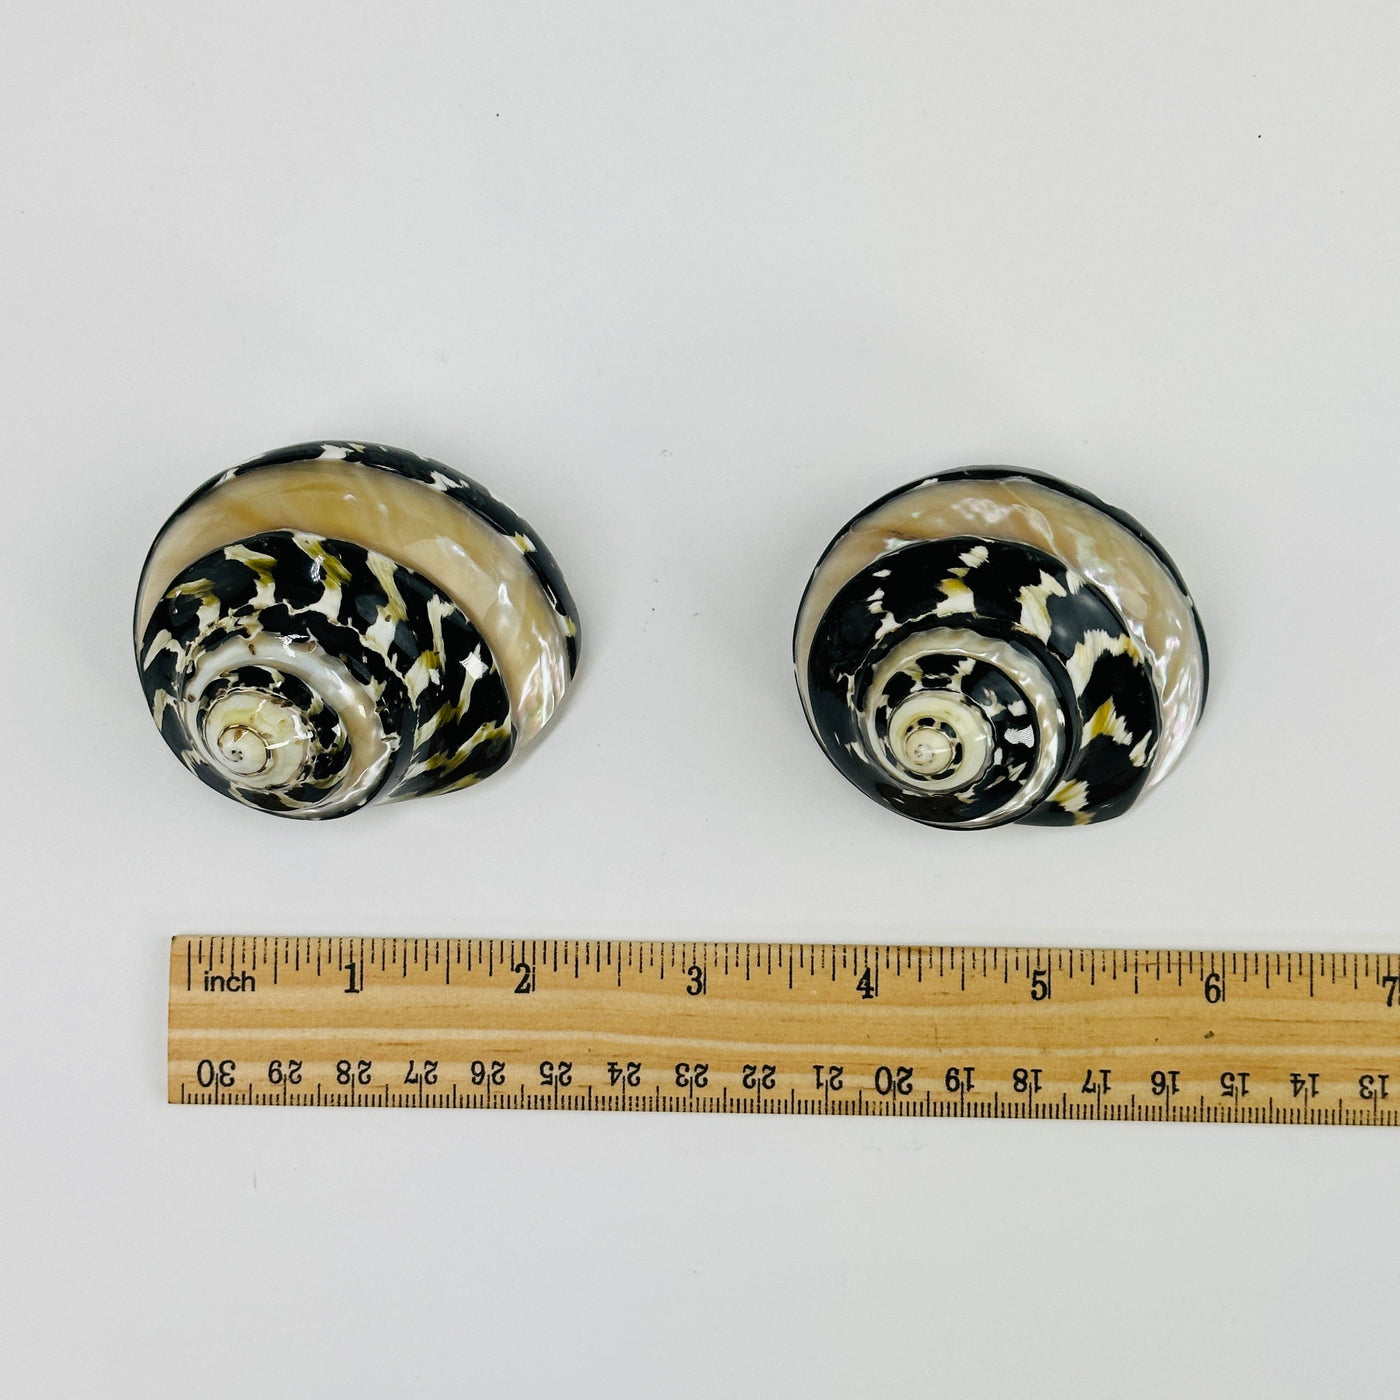 Cittarium Pica Polished Sea snail shell next to a ruler for size reference